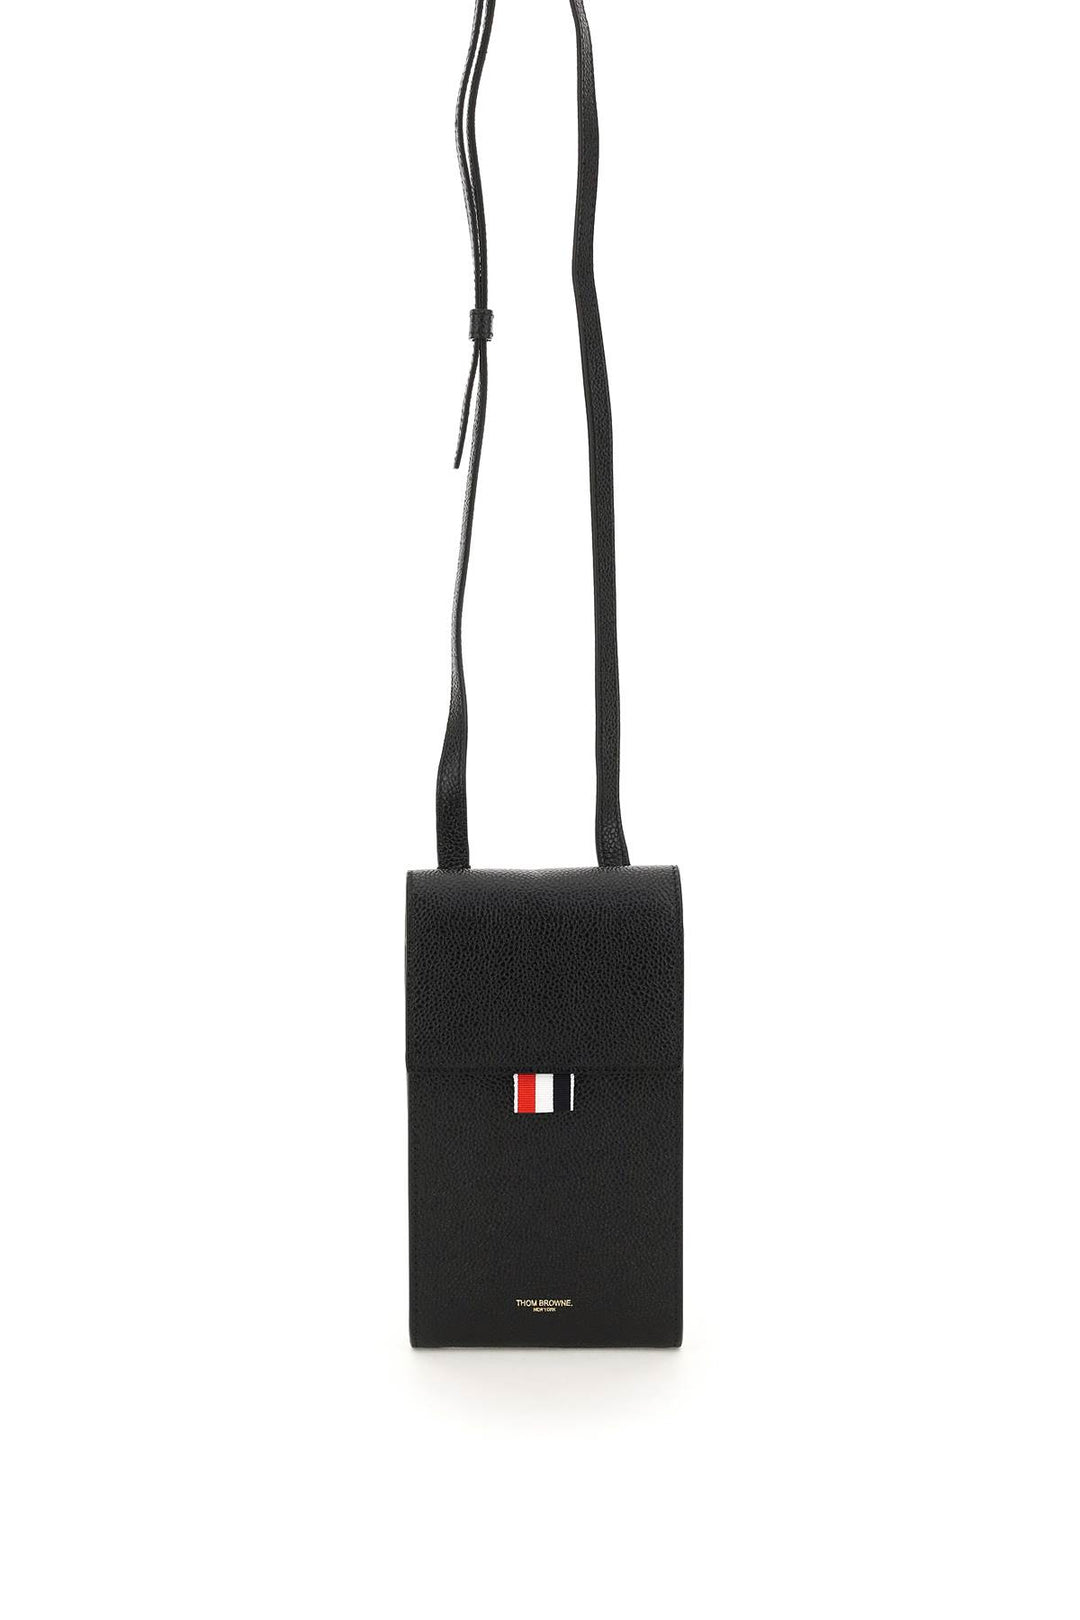 Thom Browne Pebble Grain Leather Phone Holder With Strap   Nero